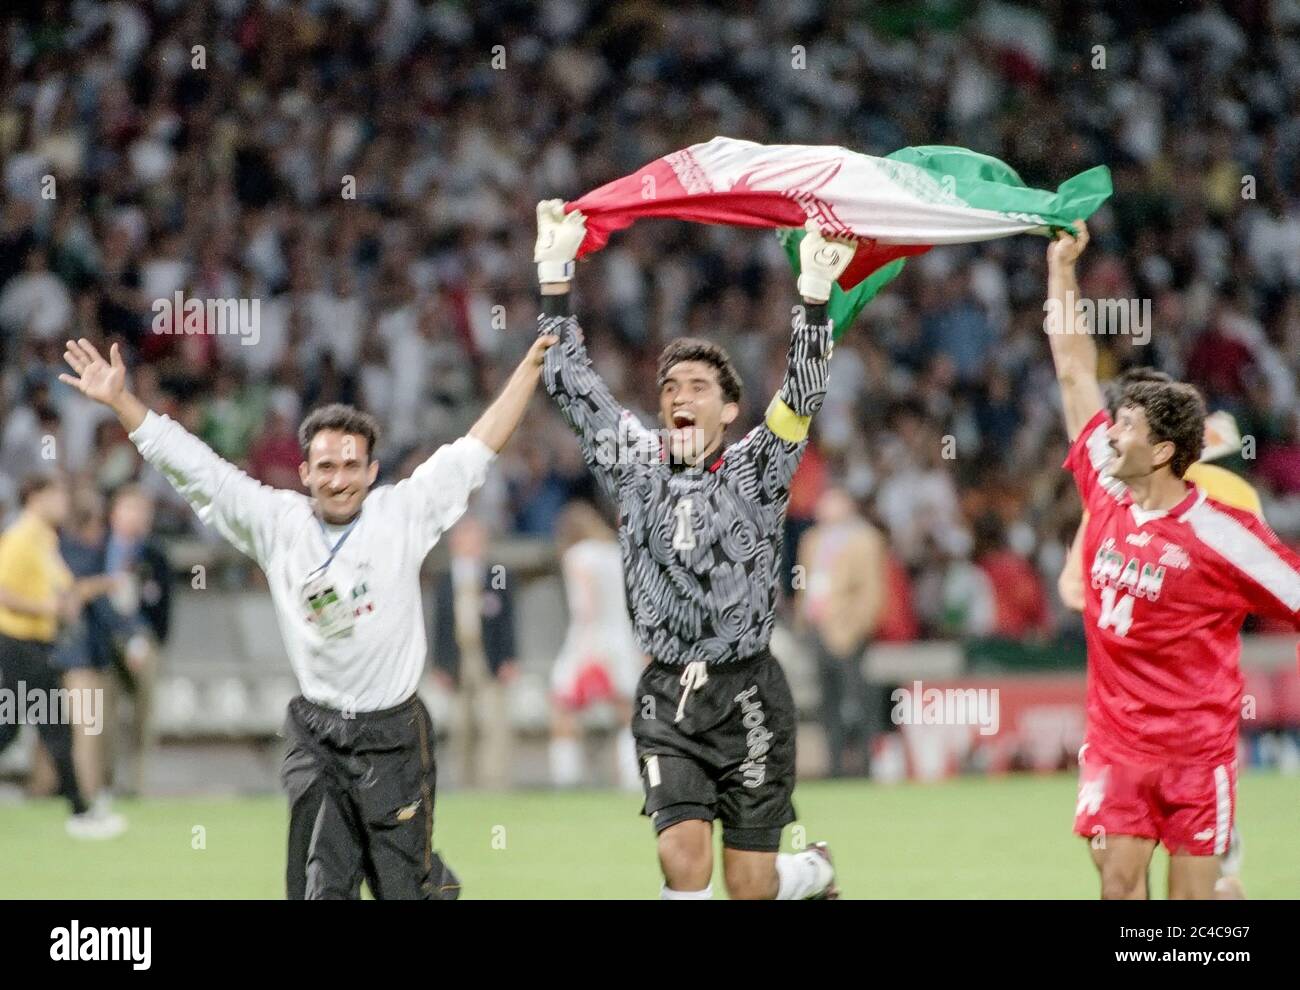 Ahmed ABEDZADEH (1) and  Nader KHANI (14) of Iran after their 1998 World Cup match against the USA. Stock Photo